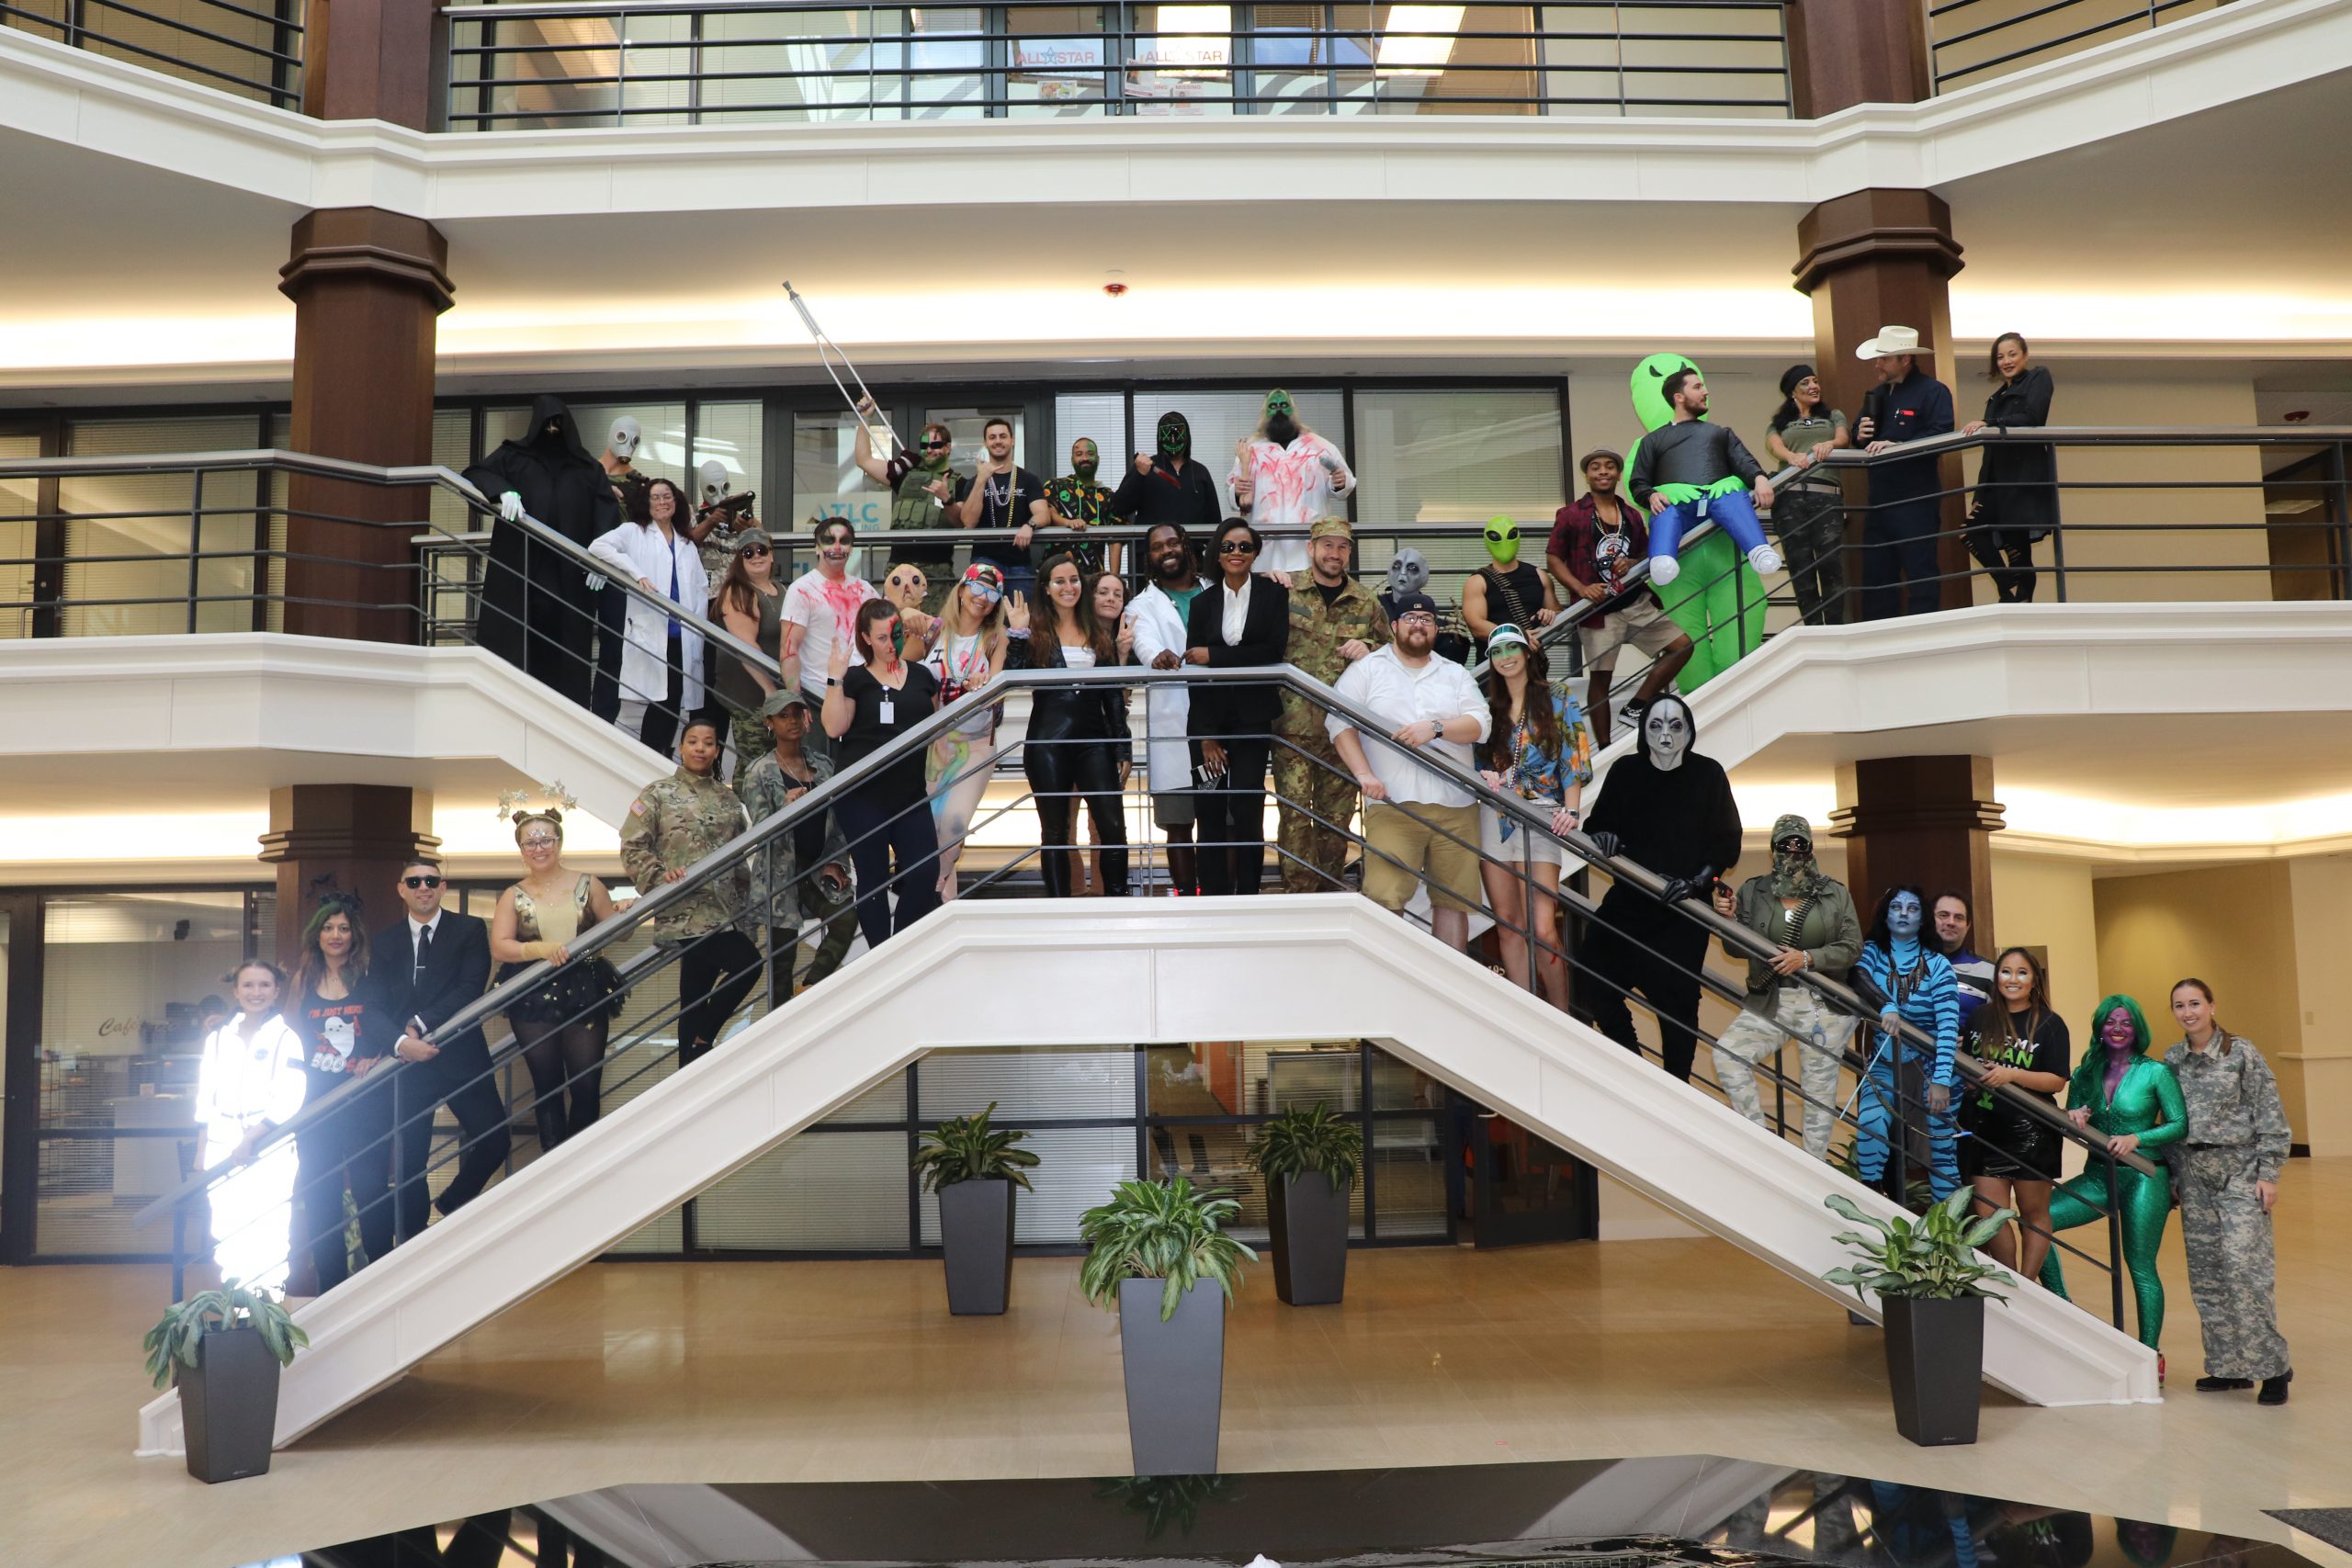 Employees standing on stairwell in Holloween costumes